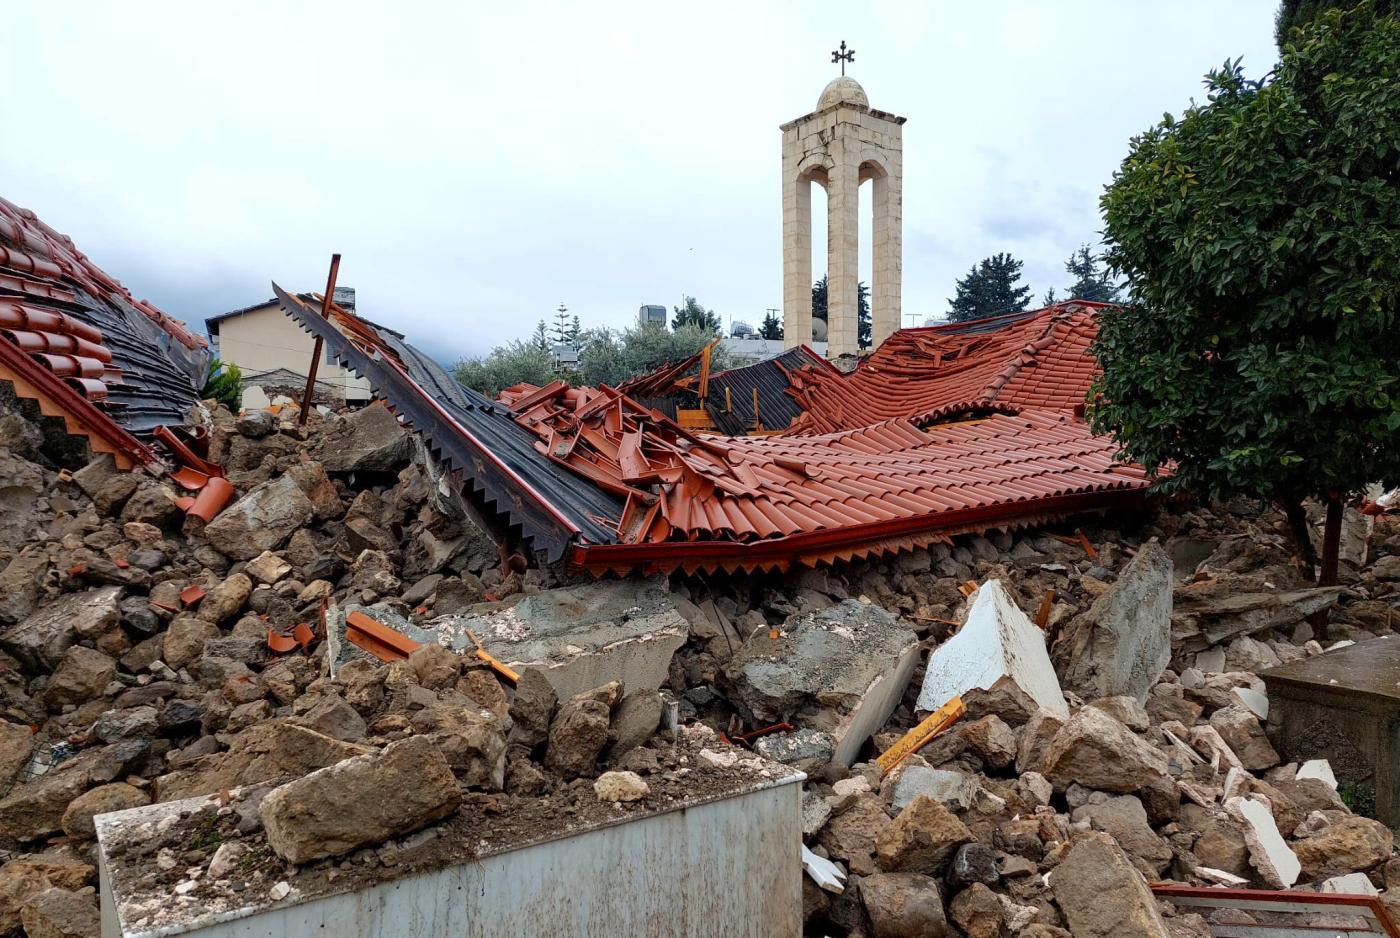 Church tower among ruins after the earthquake